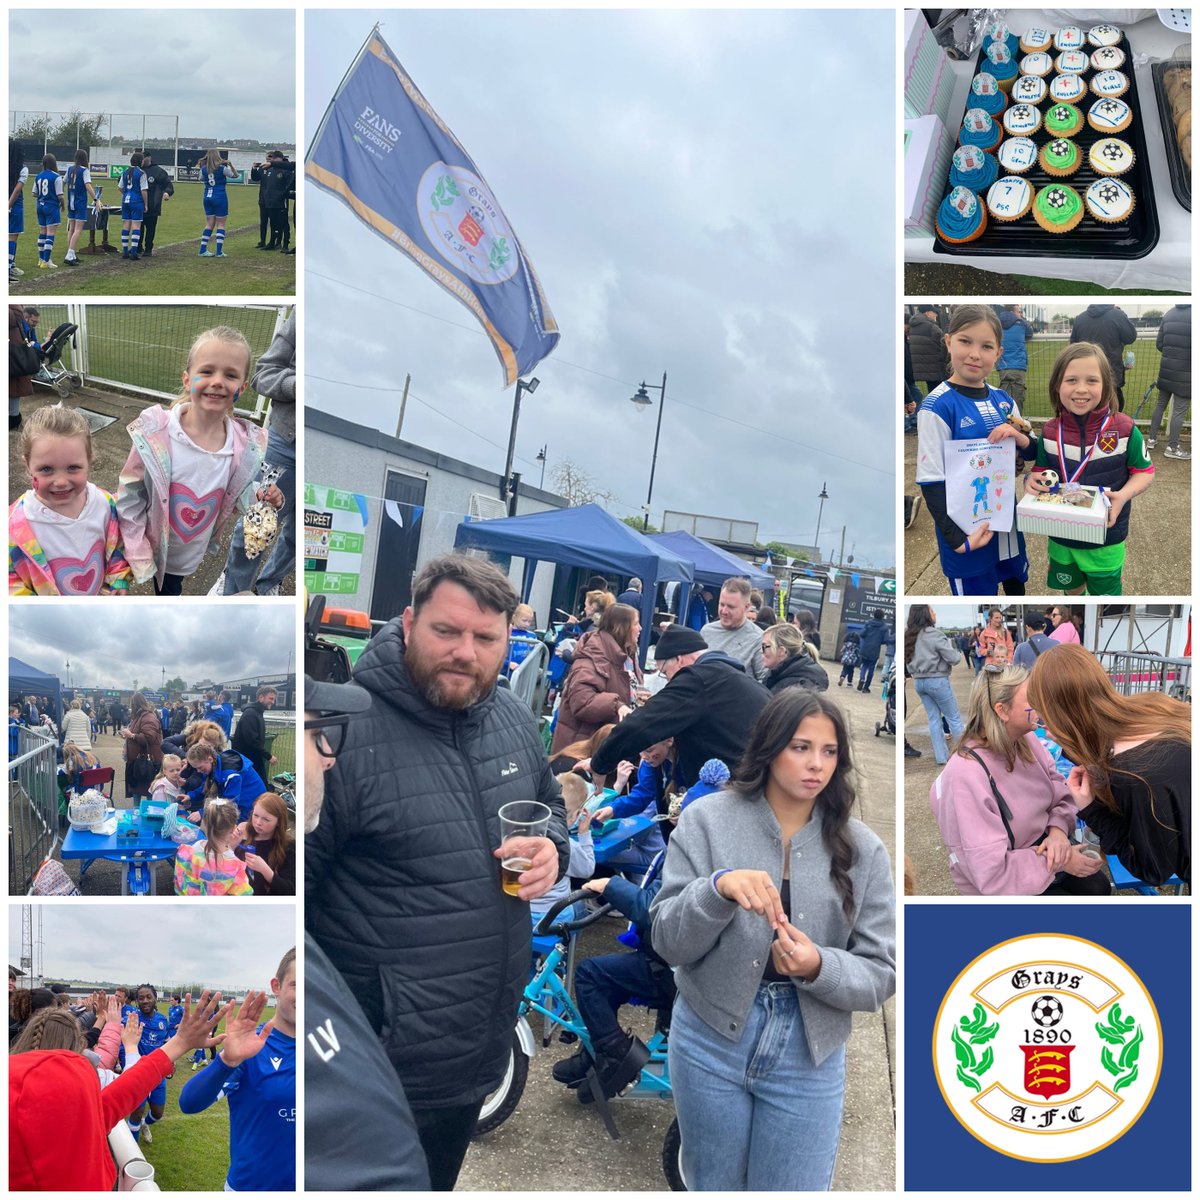 A huge thank you to the 422 people who attended our Community Fun Day today and to the amazing army of volunteers who made it happen, you are all incredible. Here's a bunch of brilliant pics to show just how special this club and our community is #GraysAthShipLane #UpTheAth